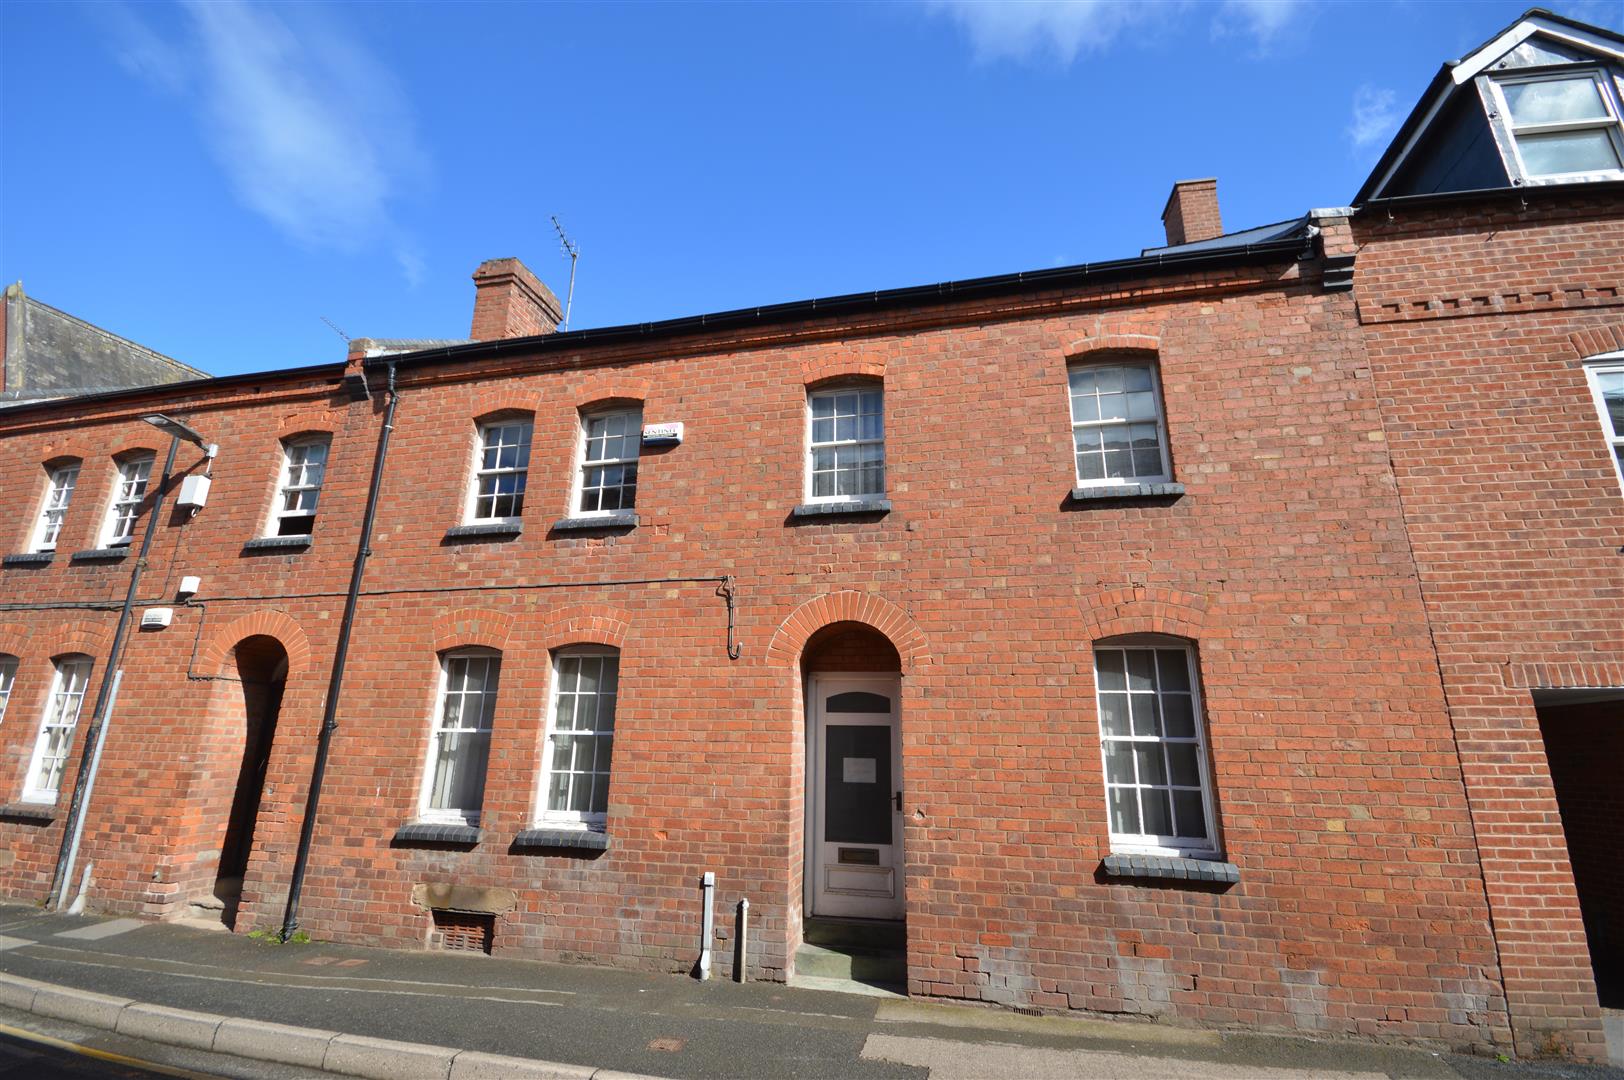 3 bed terraced for sale in Leominster, HR6